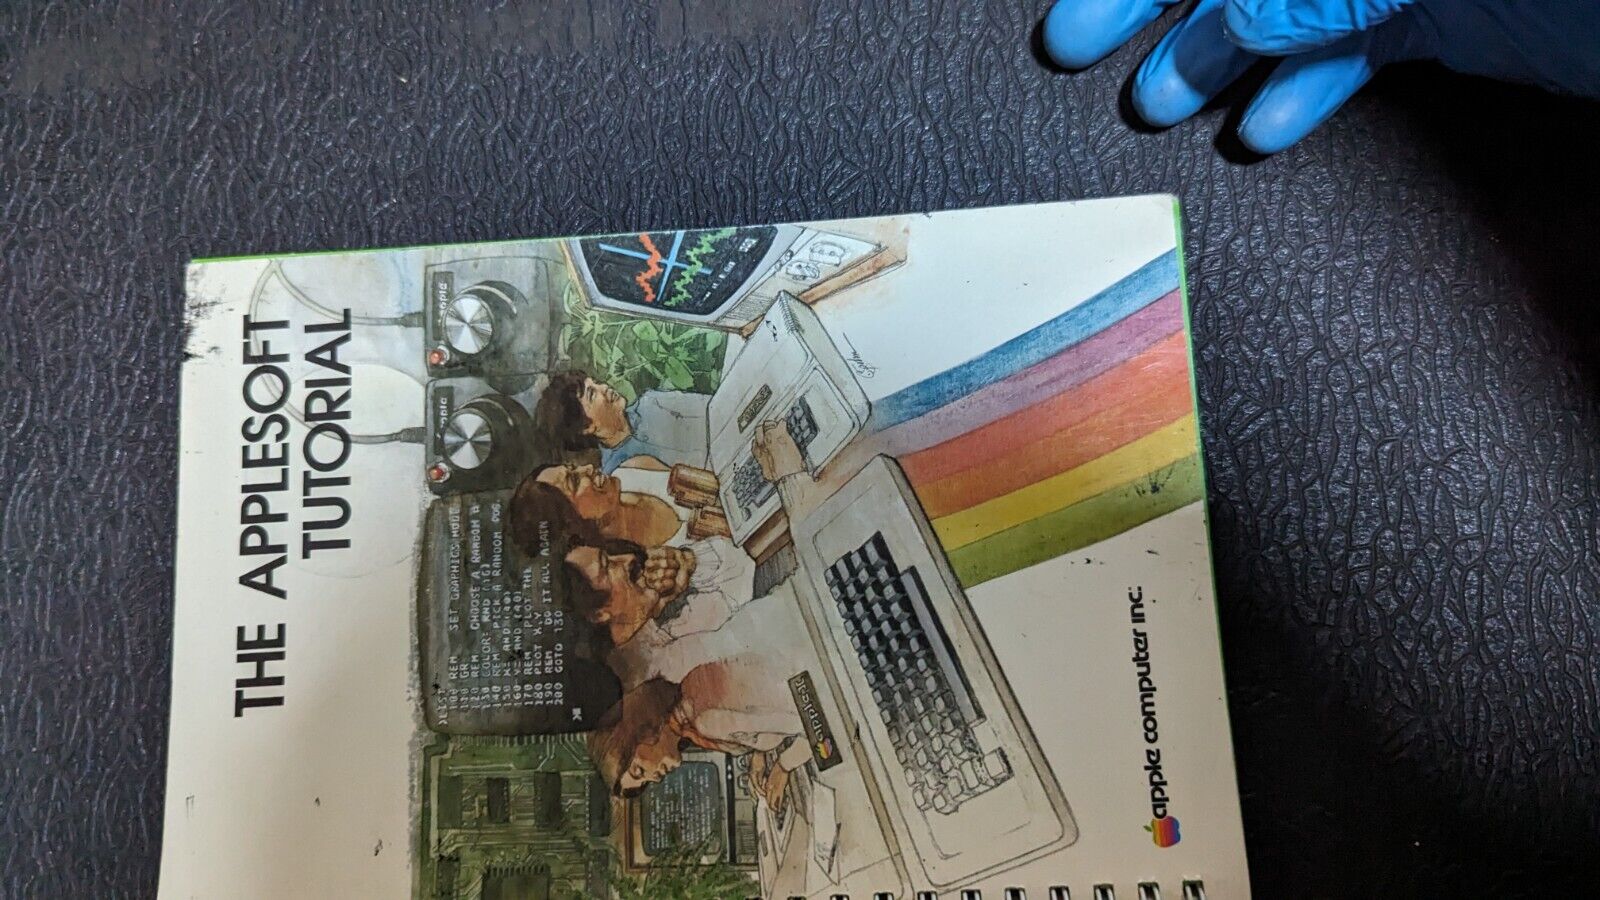 THE APPLESOFT TUTORIAL Vintage Apple Computer Reference Manual Guide